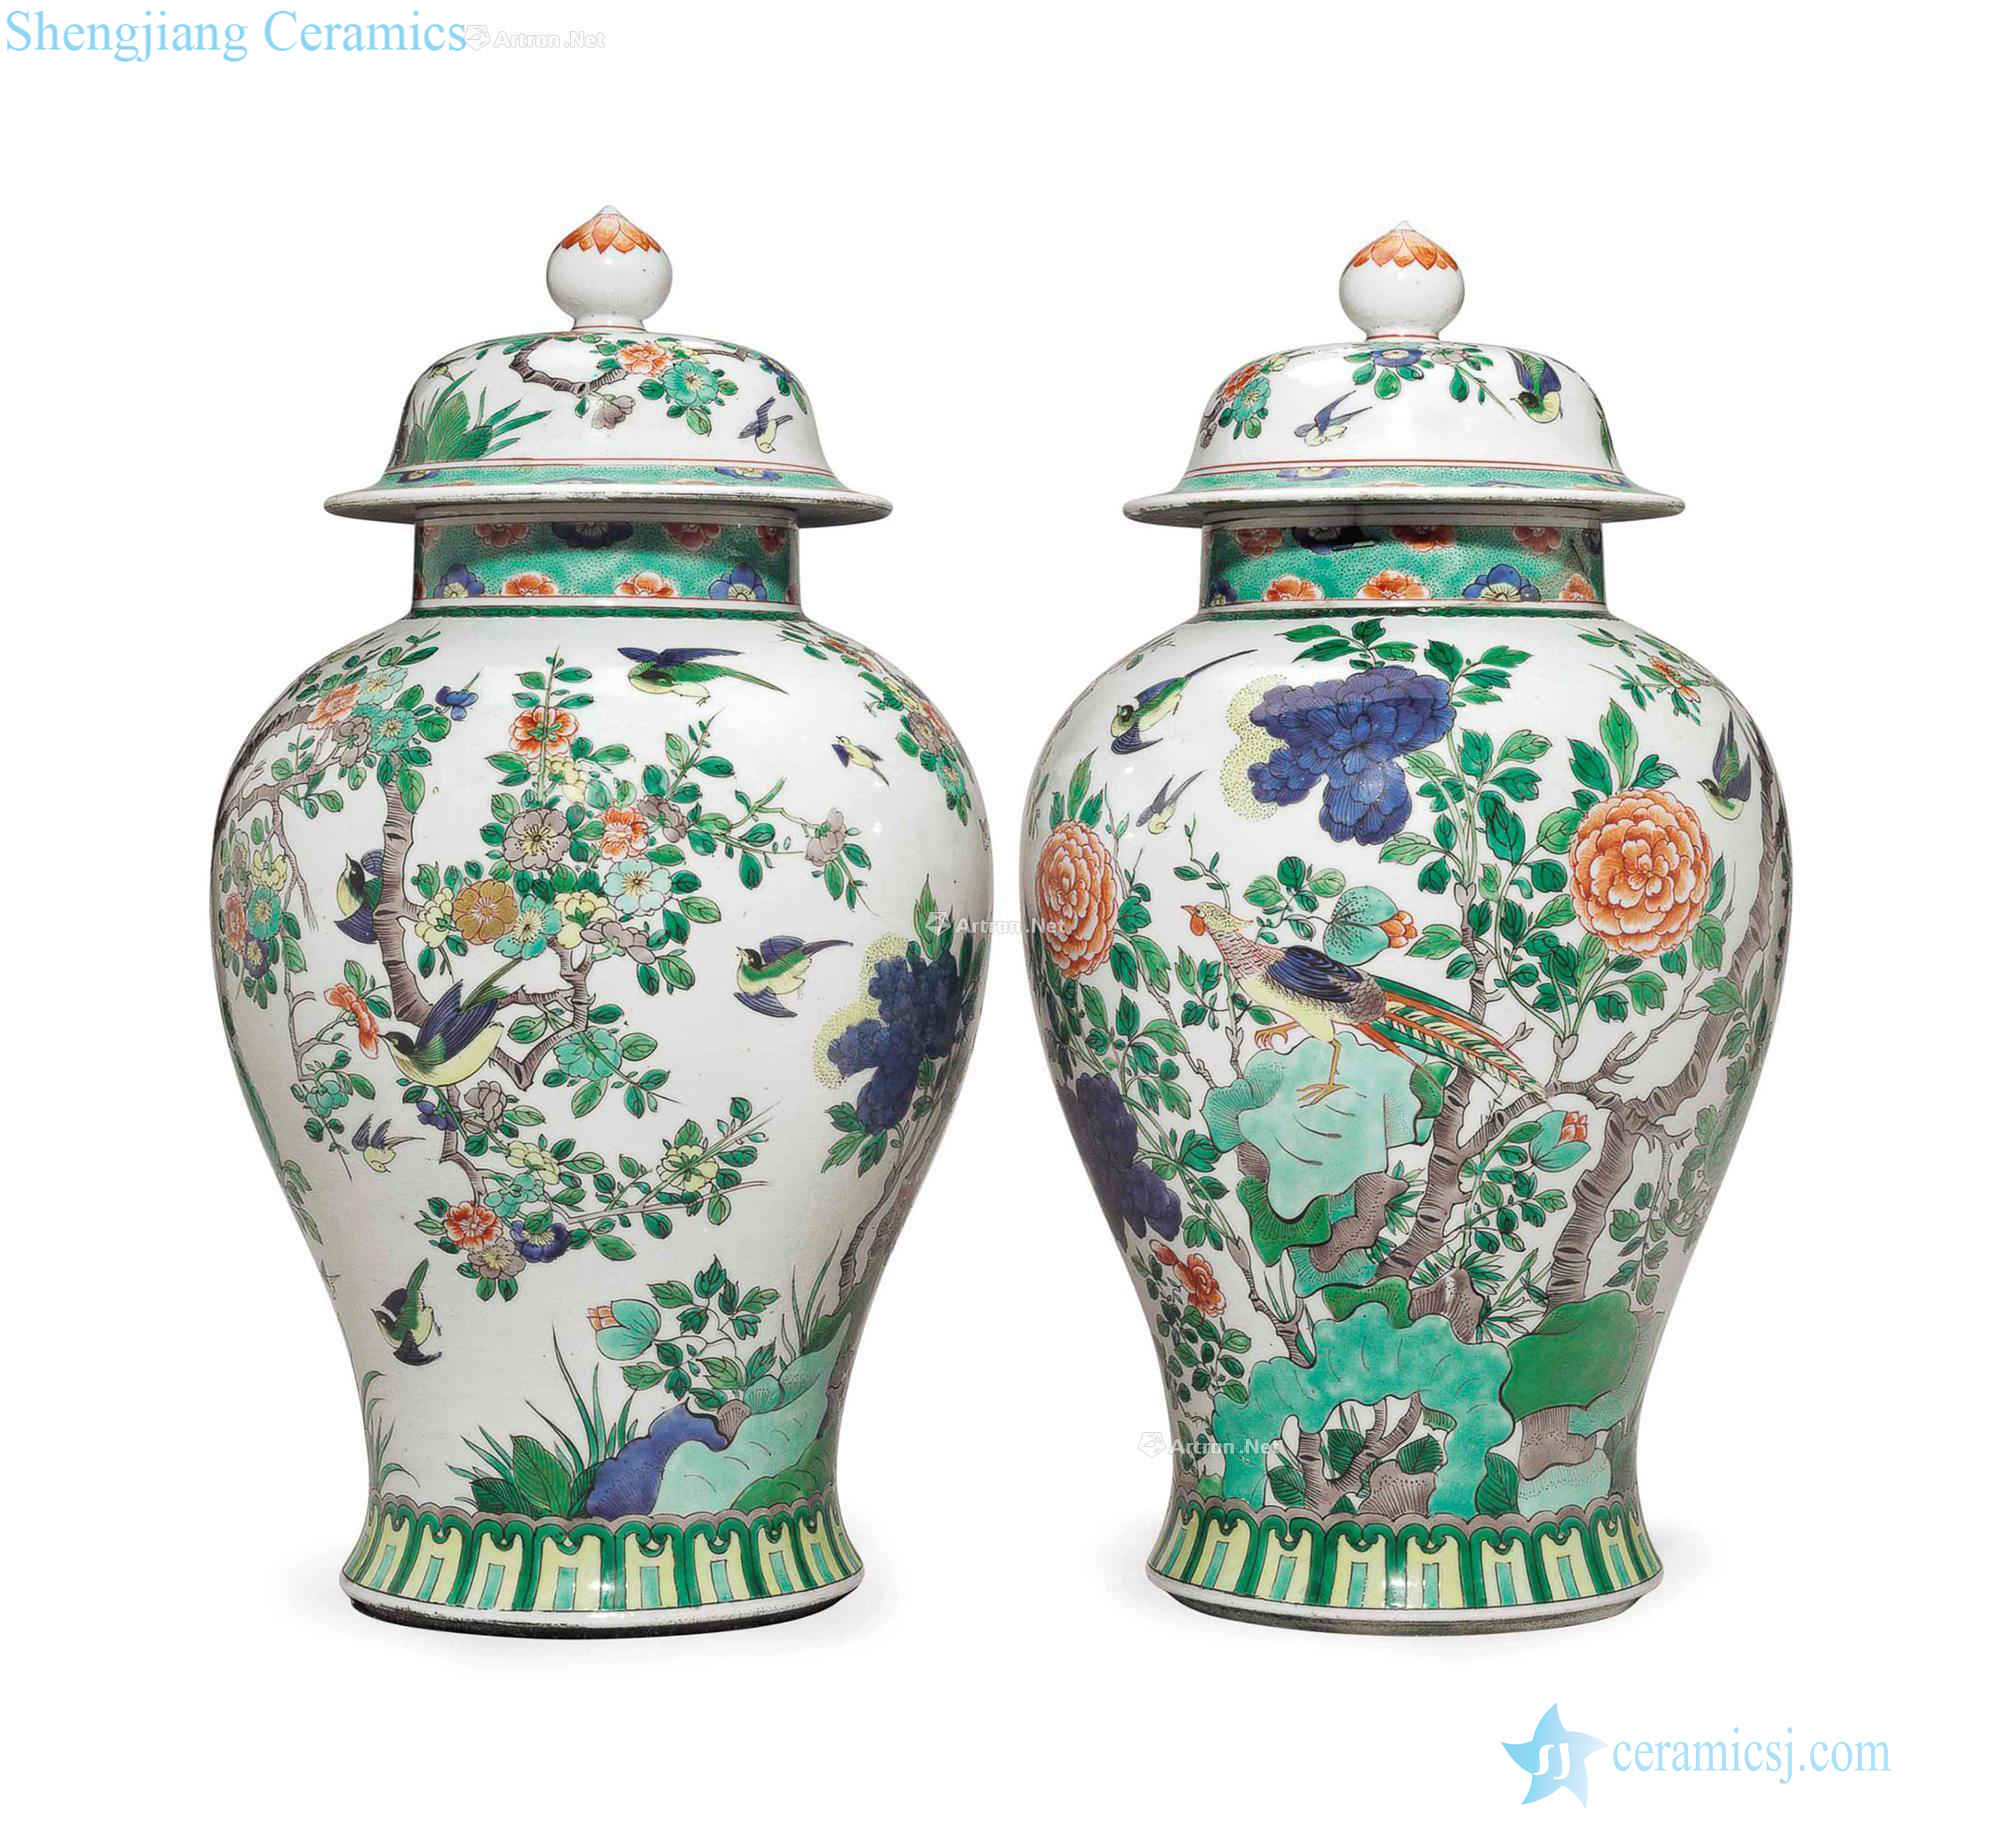 In the late 19th century early 20th century A PAIR OF SAMSON FAMILLE VERTE BALUSTER JARS AND COVERS